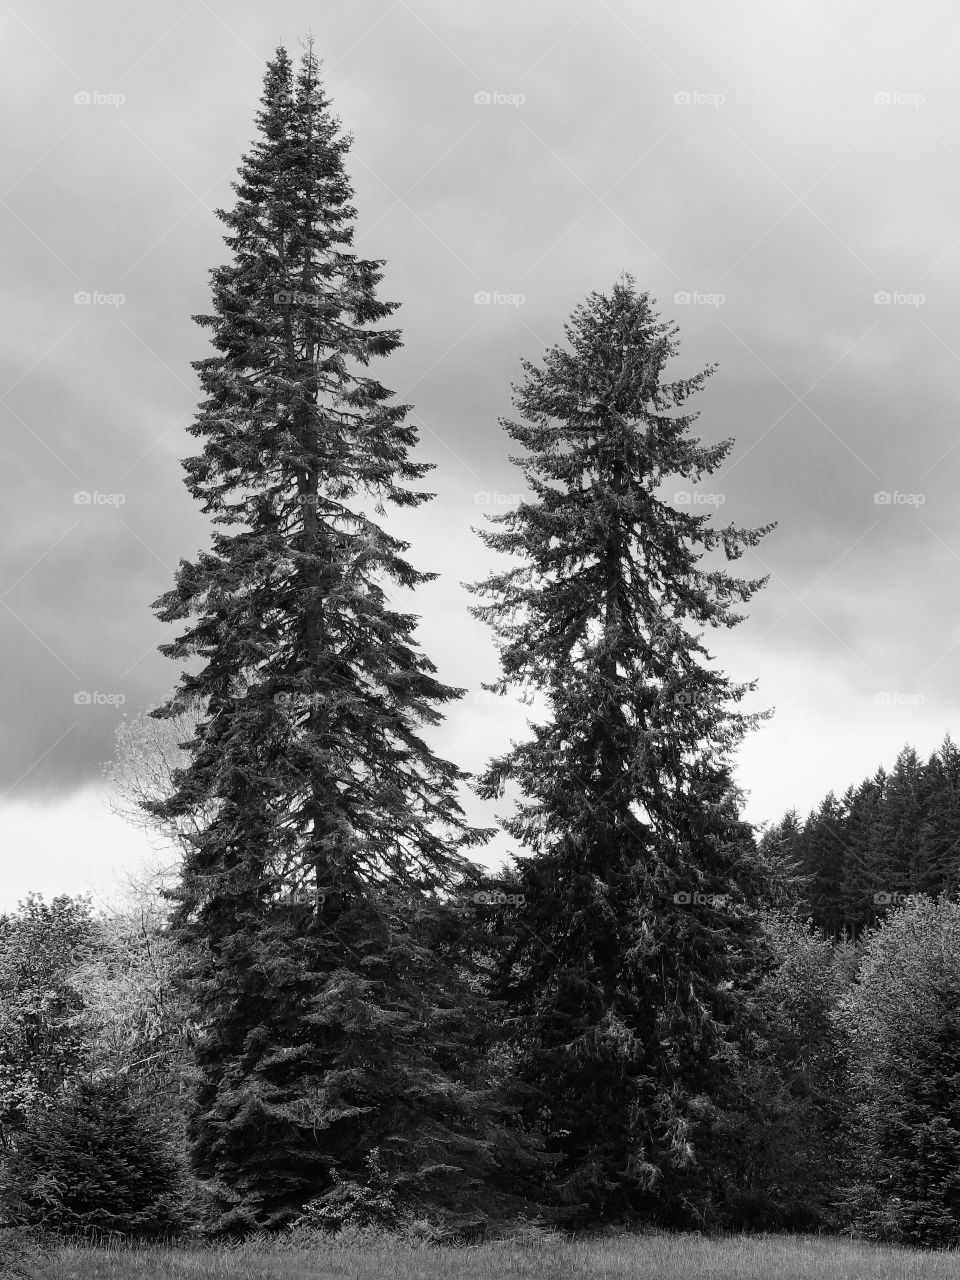 Two fir trees tower into a stormy sky